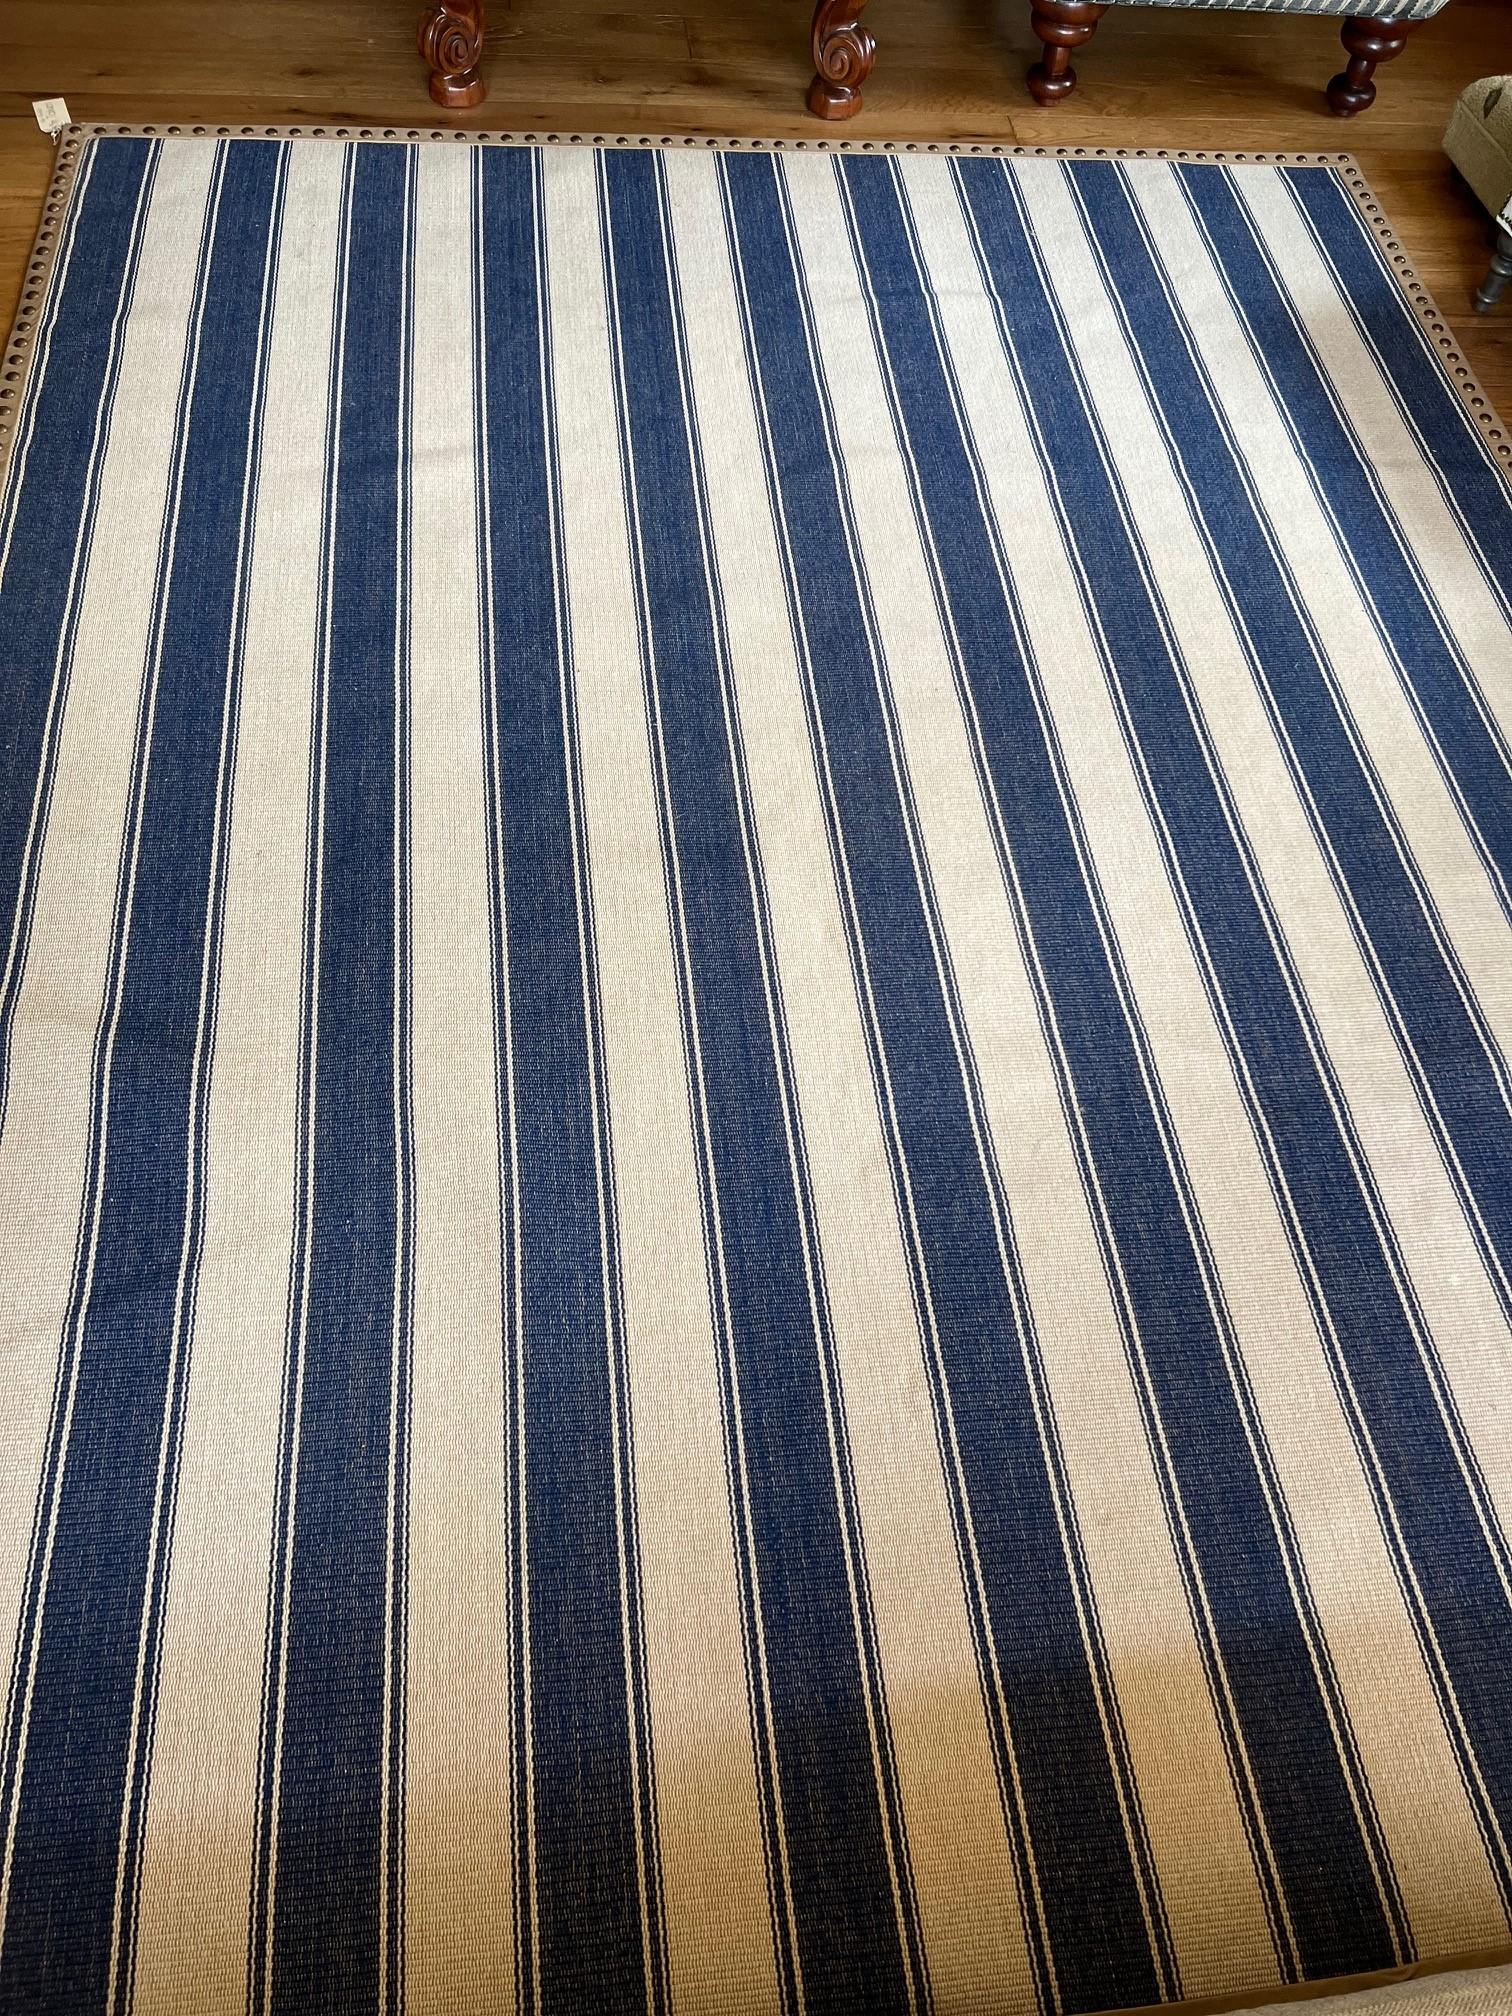 Woven Custom Blue and Beige Striped Kilim Edged With Faux Leather and Brass Trim For Sale